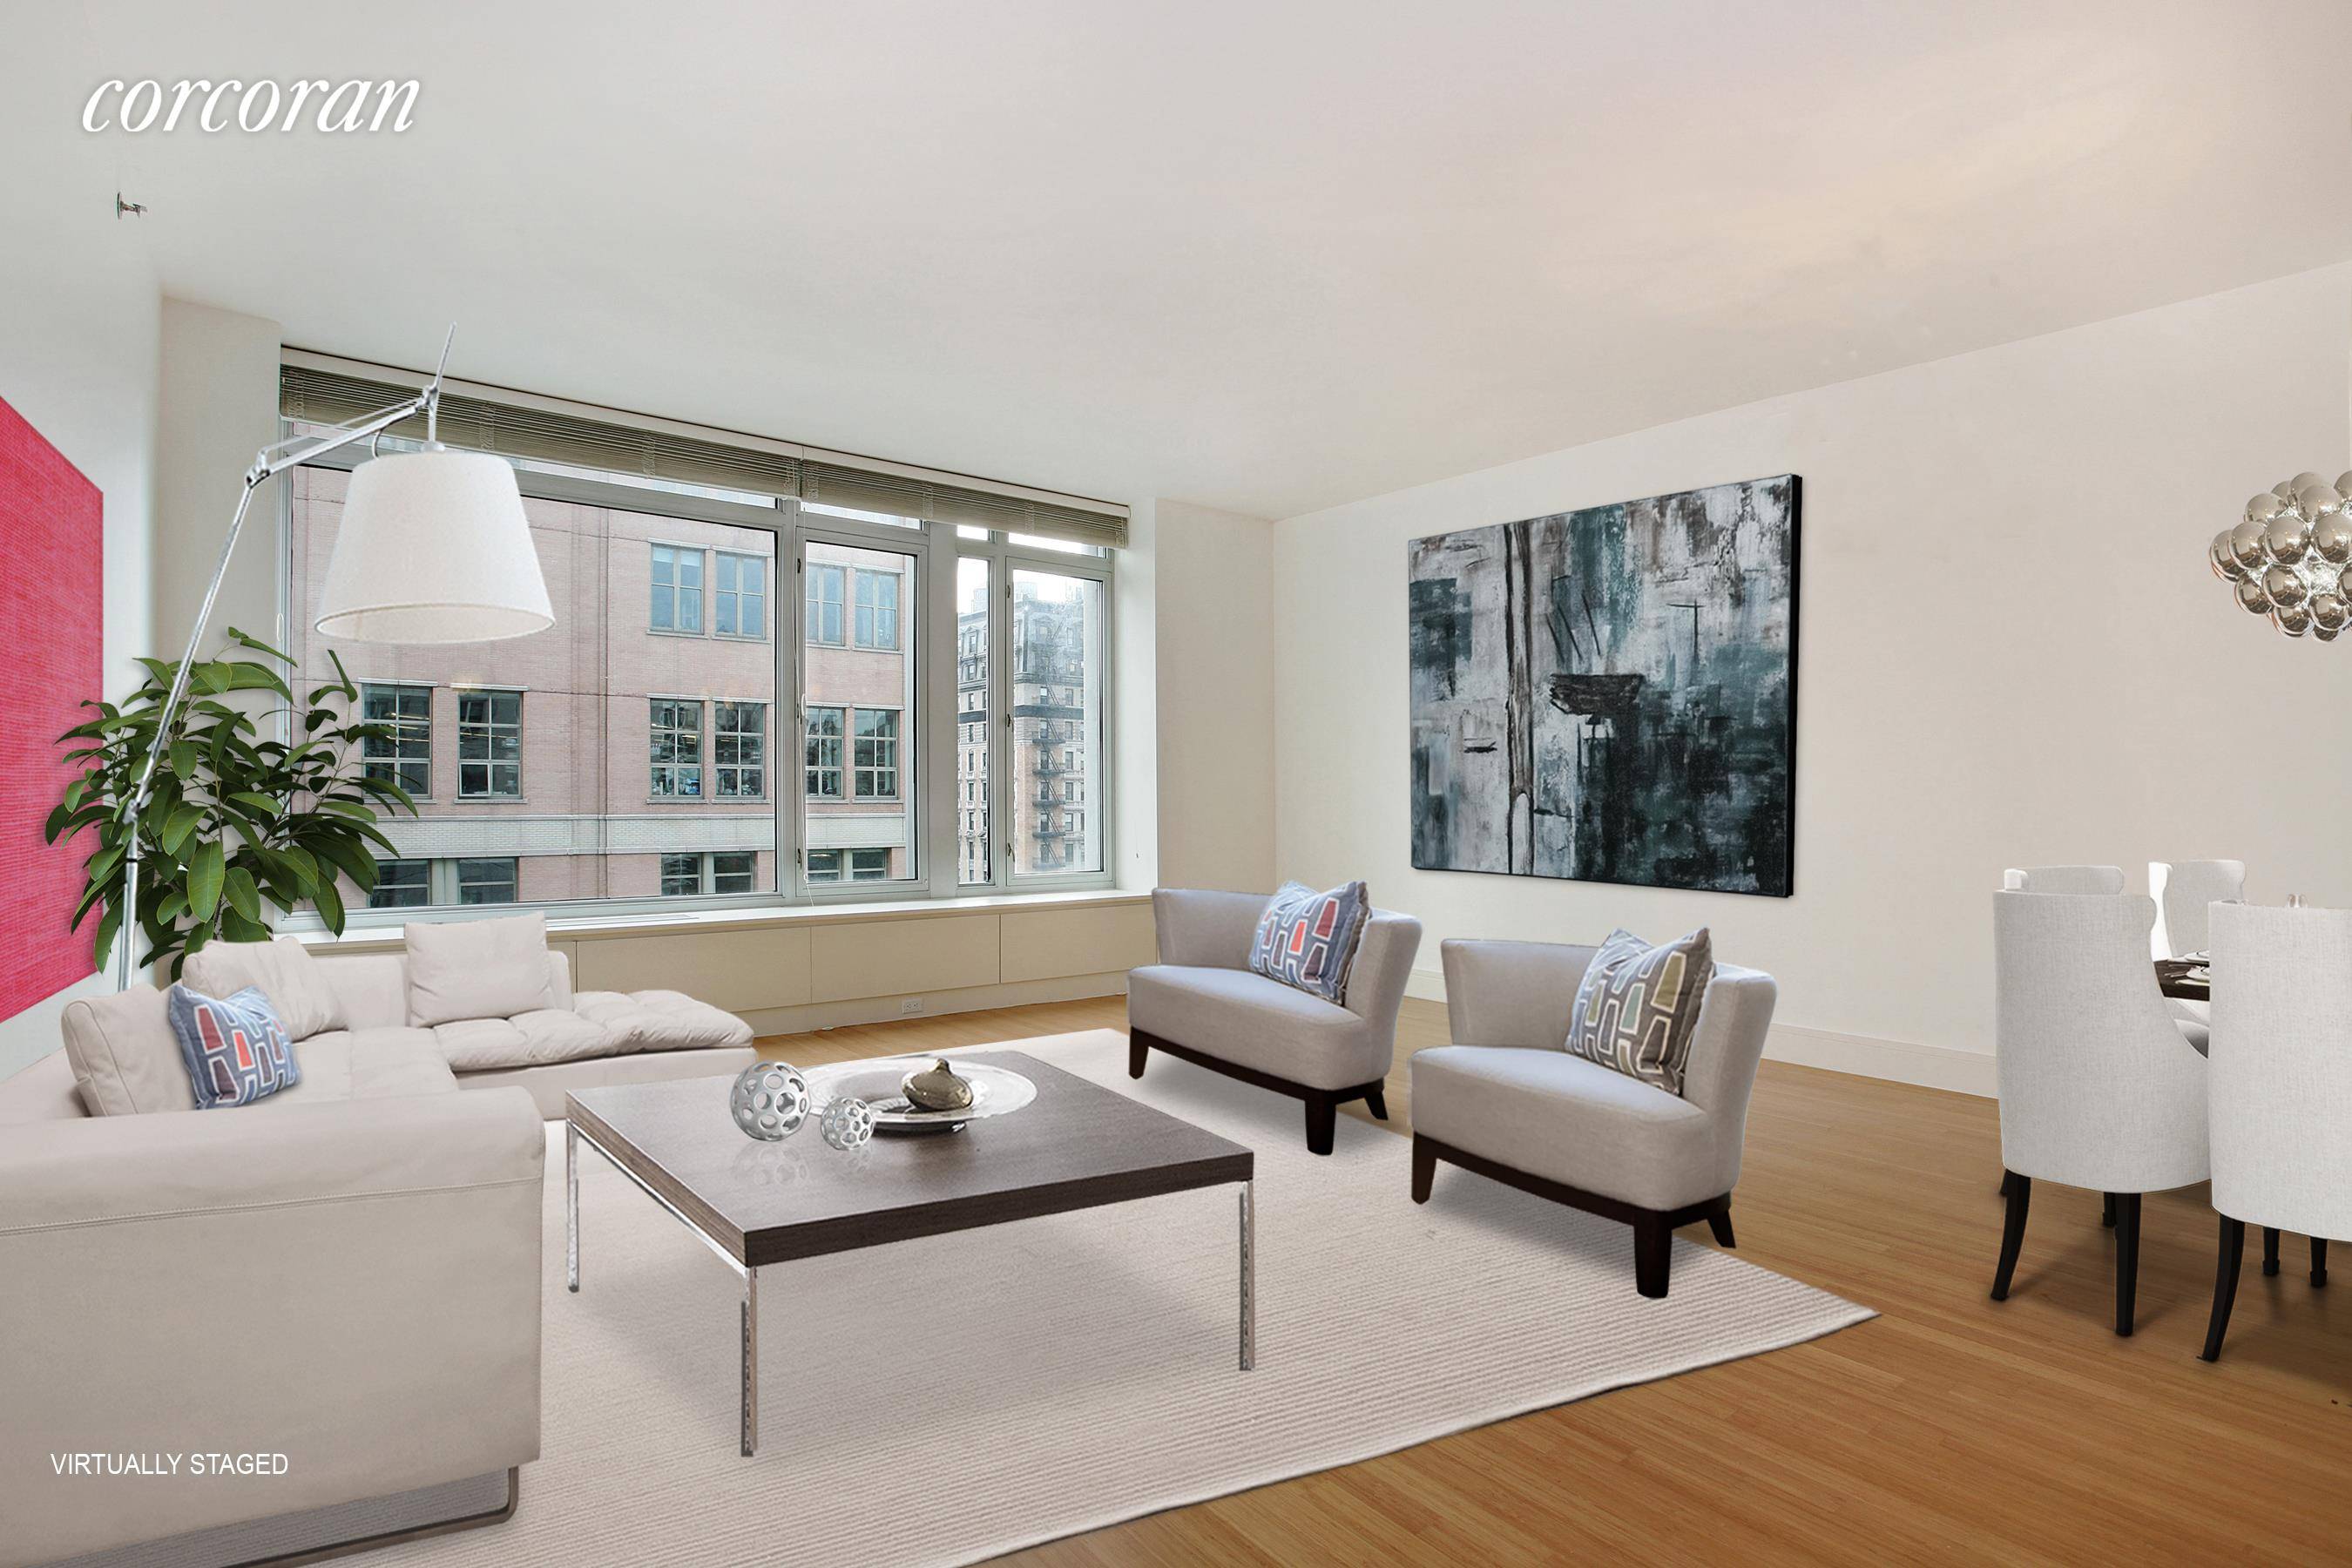 Designed by Platt, Byard, Dovell amp ; White, this expansive 2 bedroom, 2 bath condominium is a modern masterpiece set in the Upper West Side's most vibrant neighborhood.